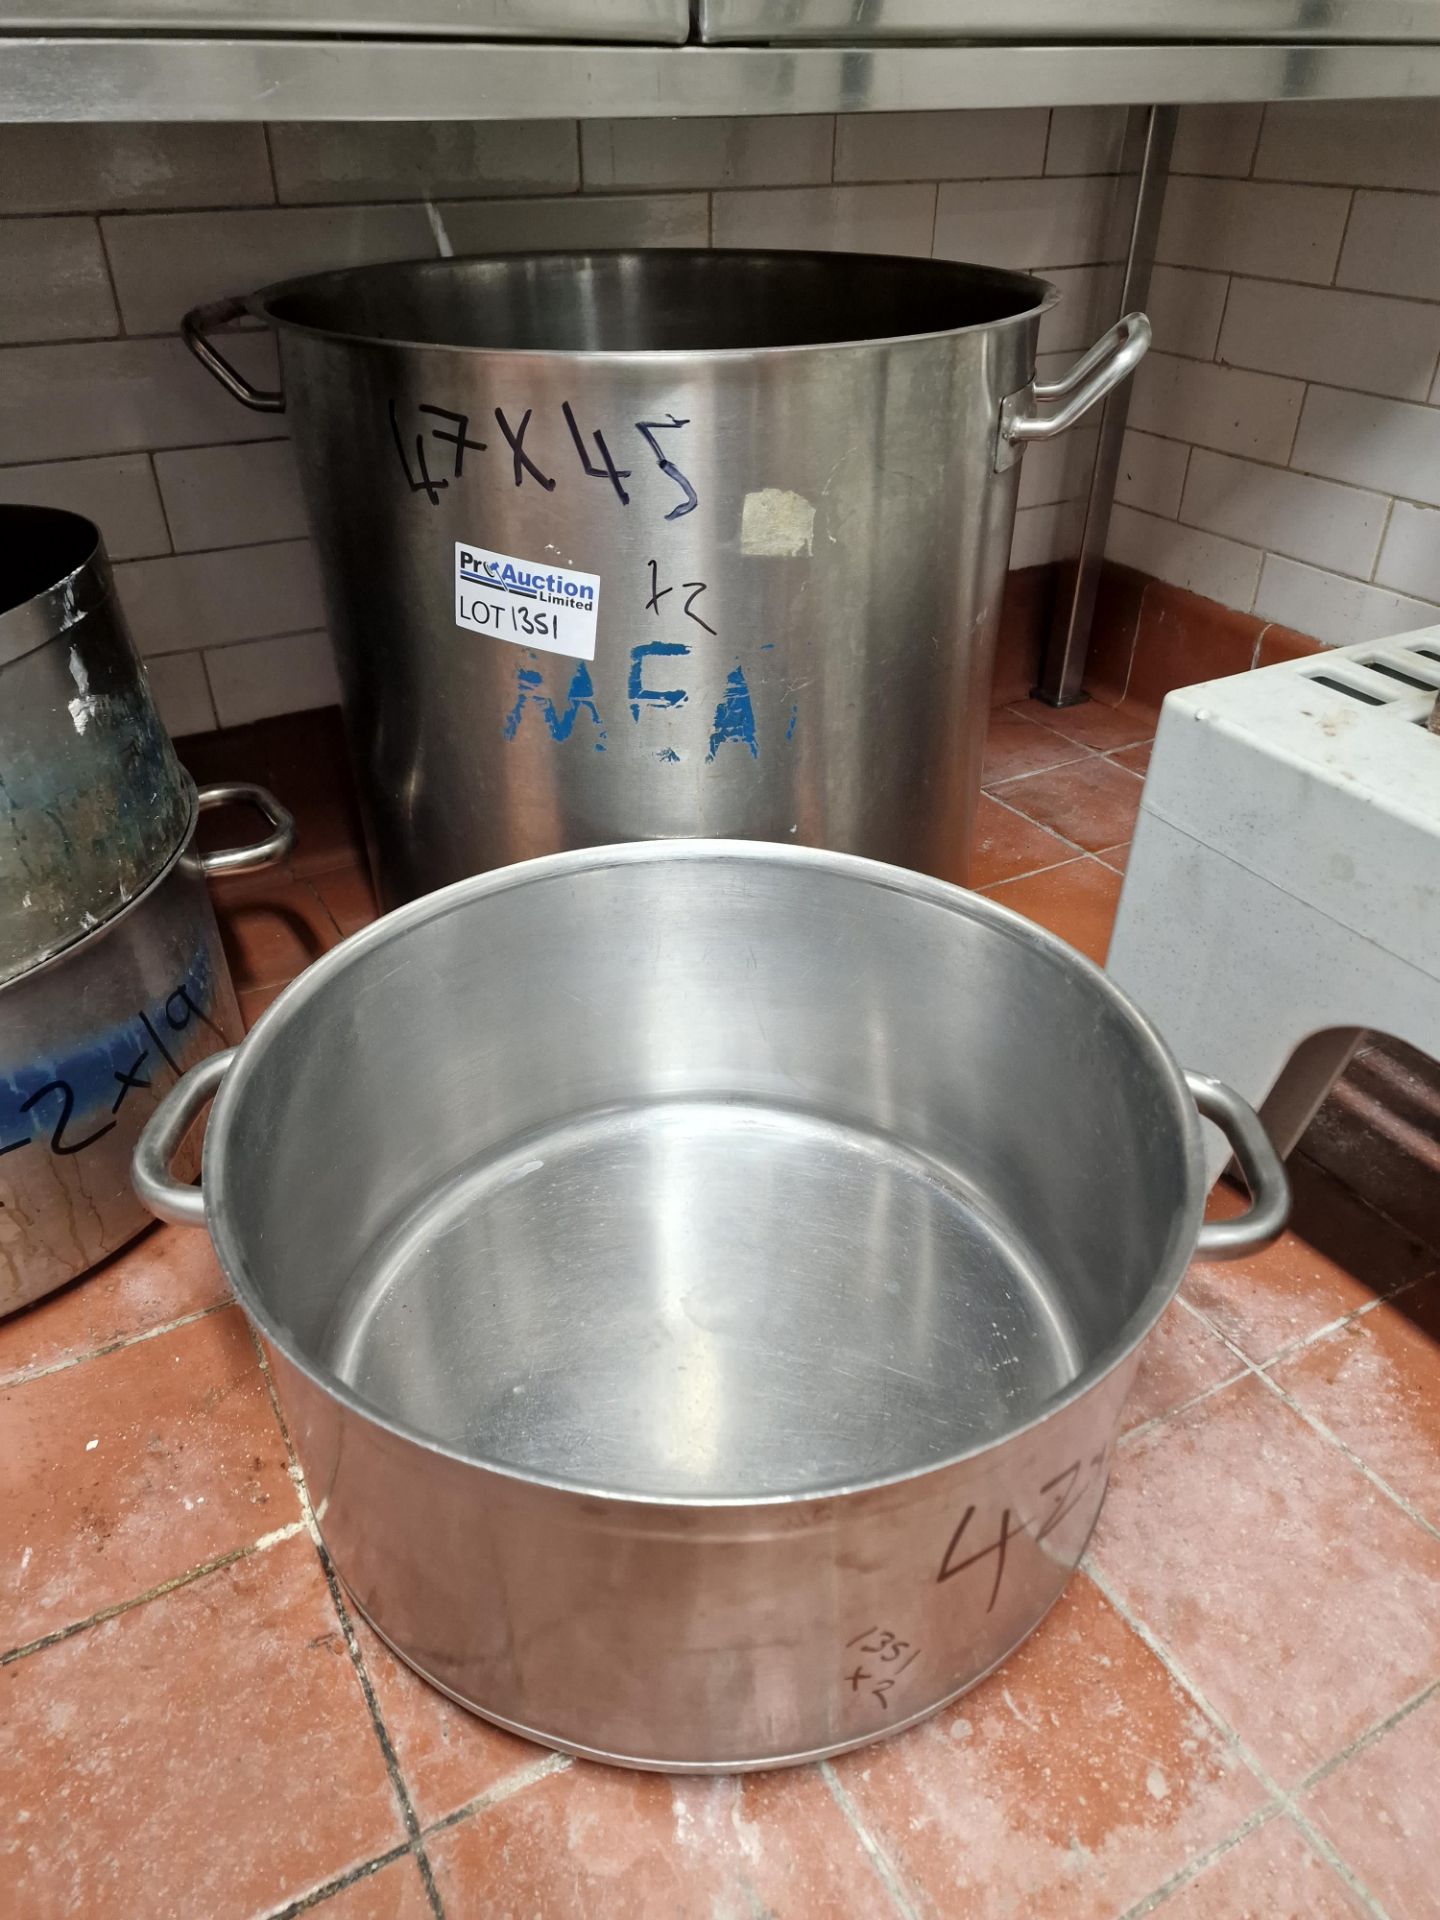 2 x Stainless Steel Commercial Stock Pots 47 x 45cm And 42 x 20cm Approximately 78 Litre And 28